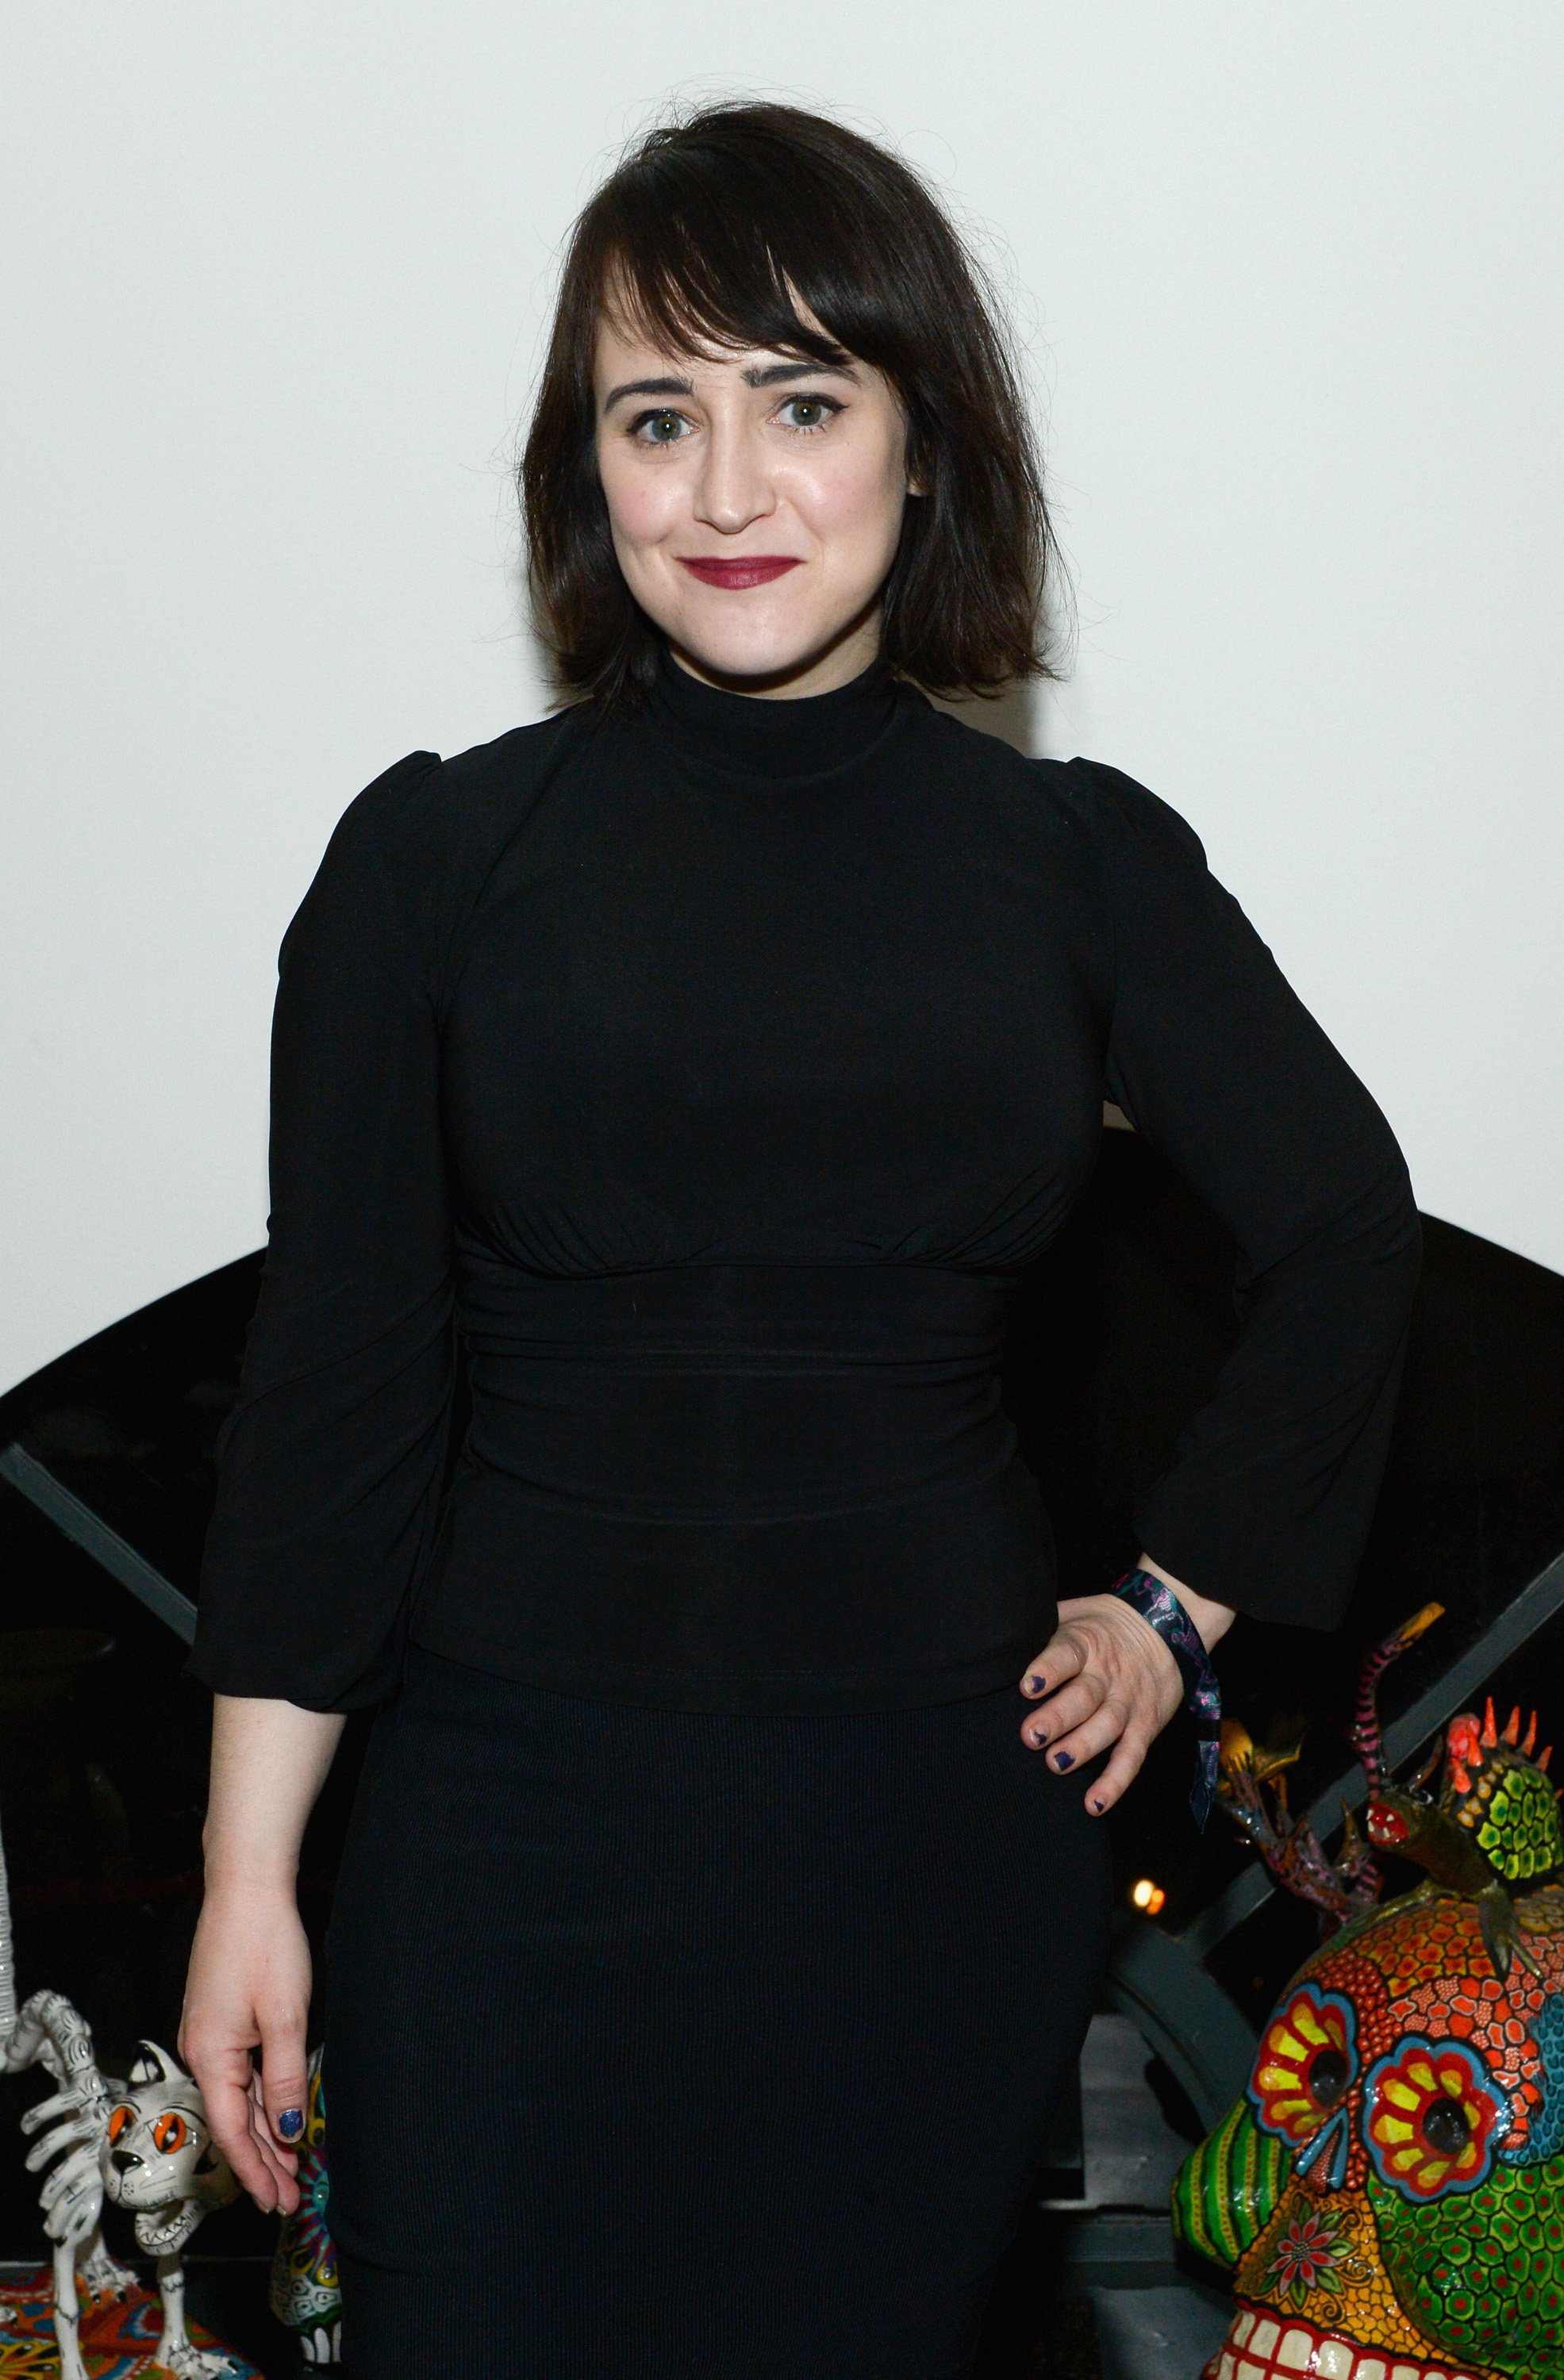 Mara Wilson attends The Secret Society Of The Sisterhood at The Masonic Lodge at Hollywood Forever in Los Angeles, California, on January 31, 2018. | Source: Getty Images